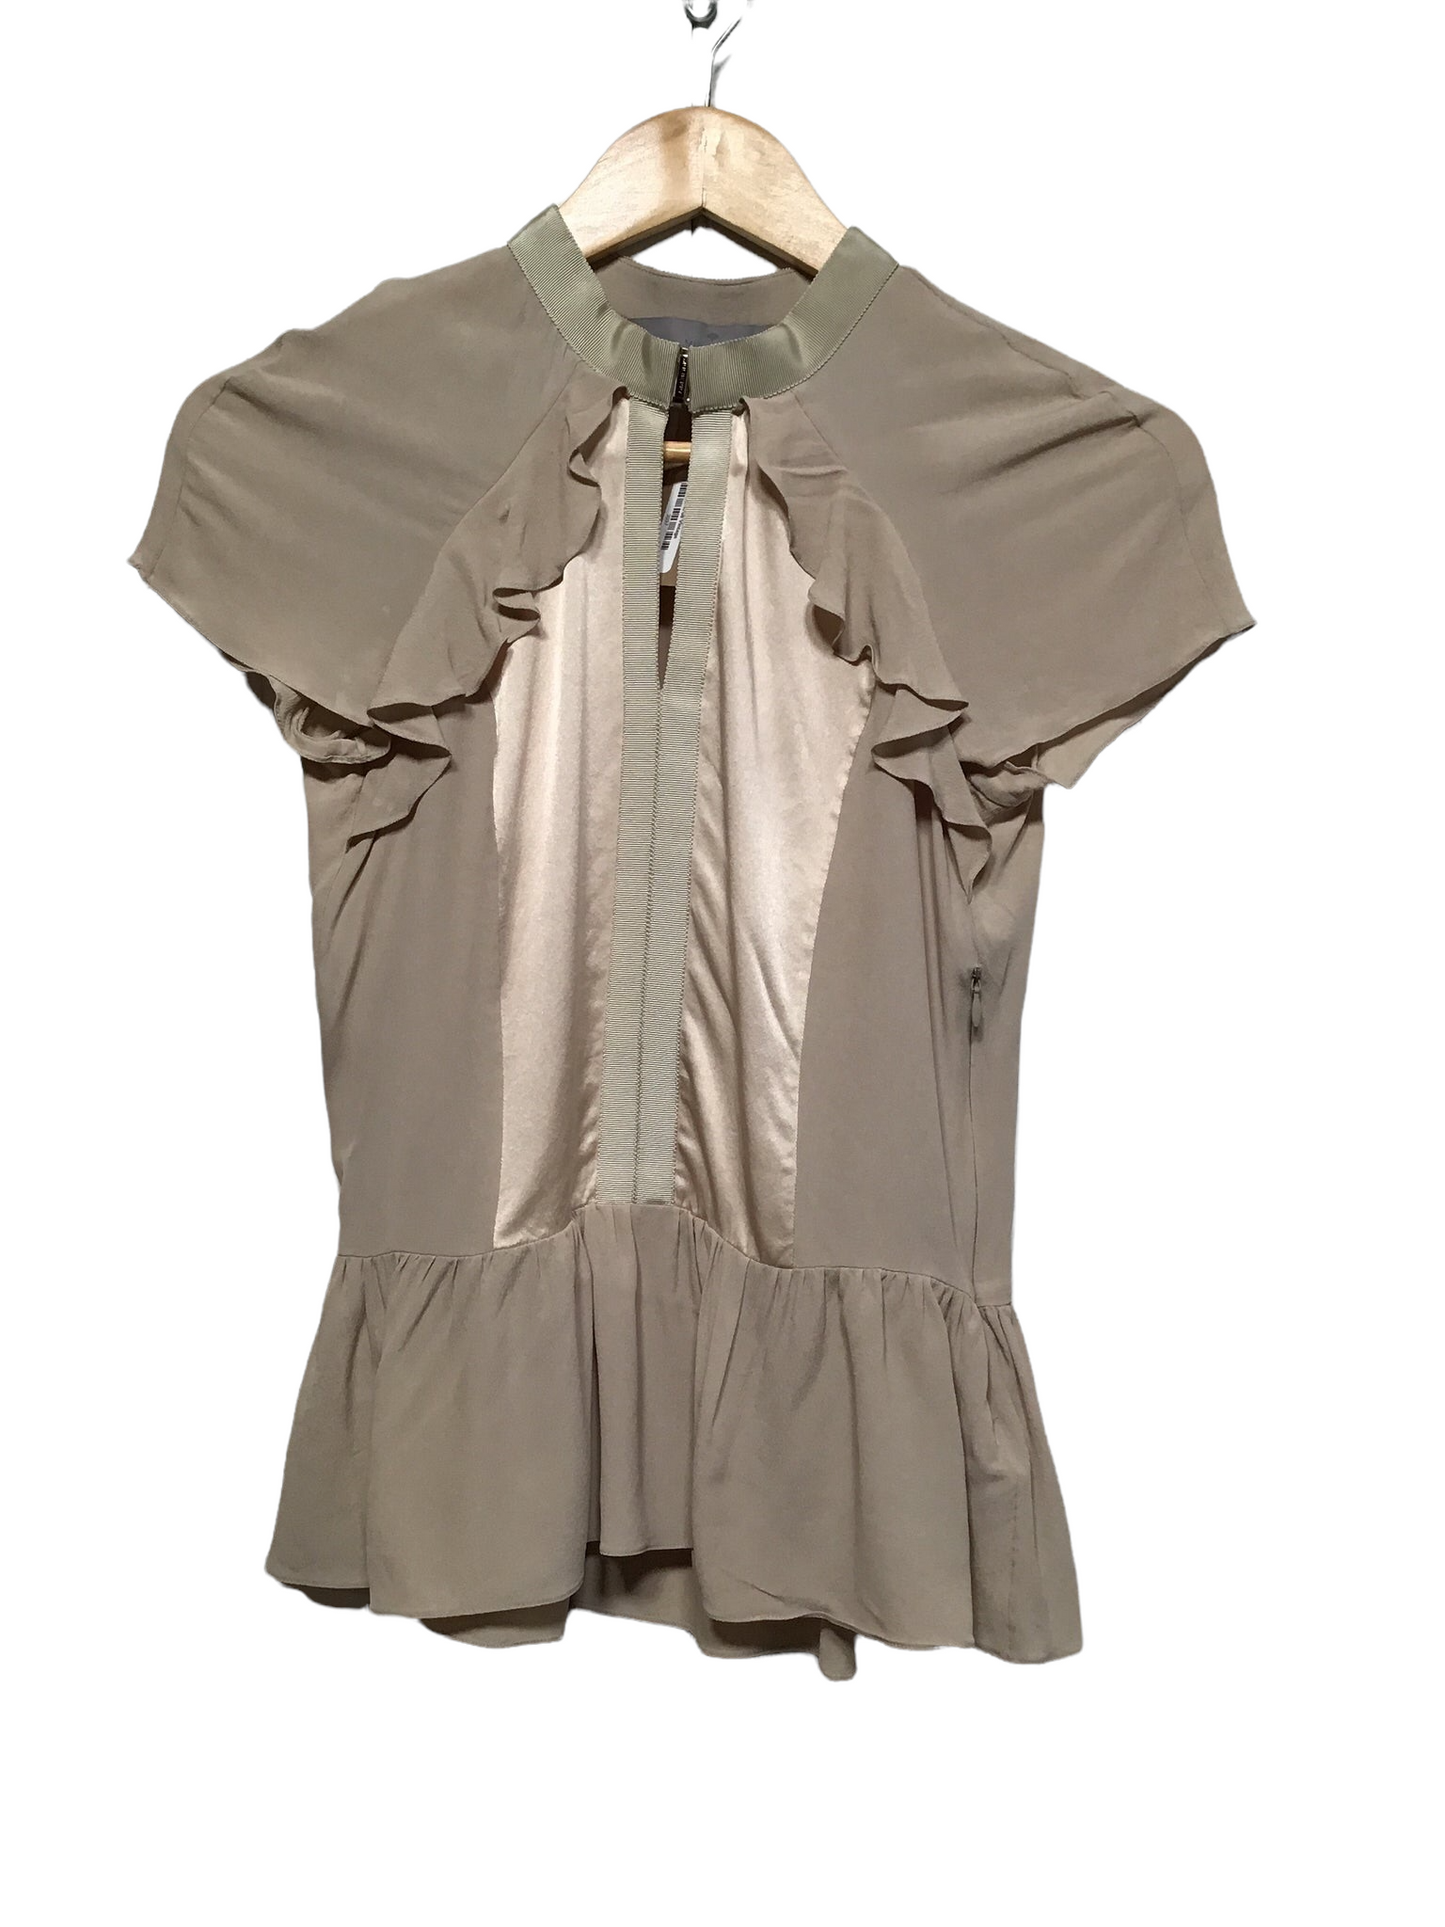 Mulberry Silk Blouse (Size S)